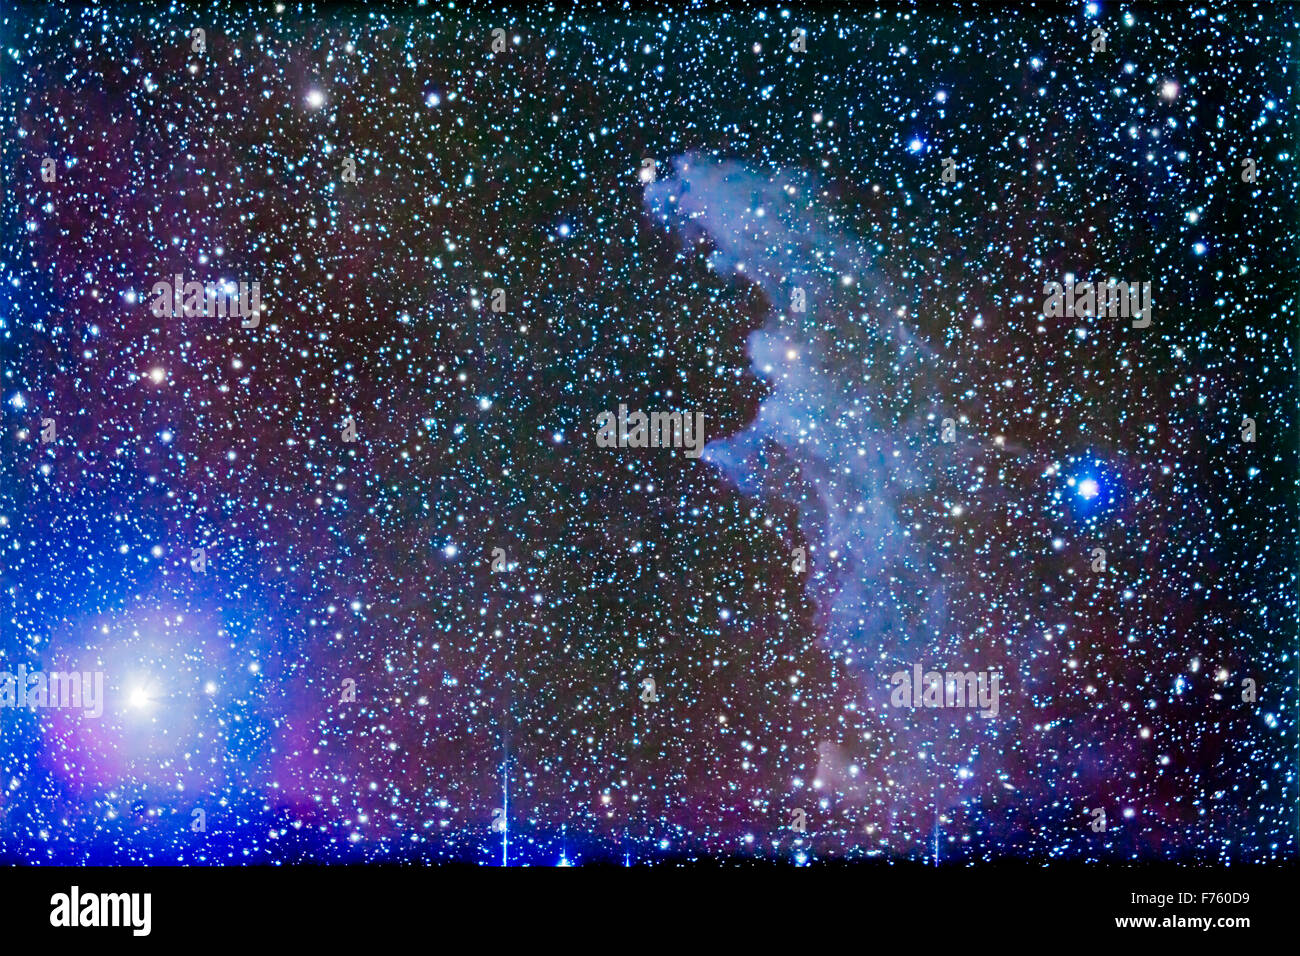 The Witchhead Nebula, IC 2118, a large reflection near the star Rigel in Orion. This is a stack of 9 x 7 minute exposures at ISO Stock Photo